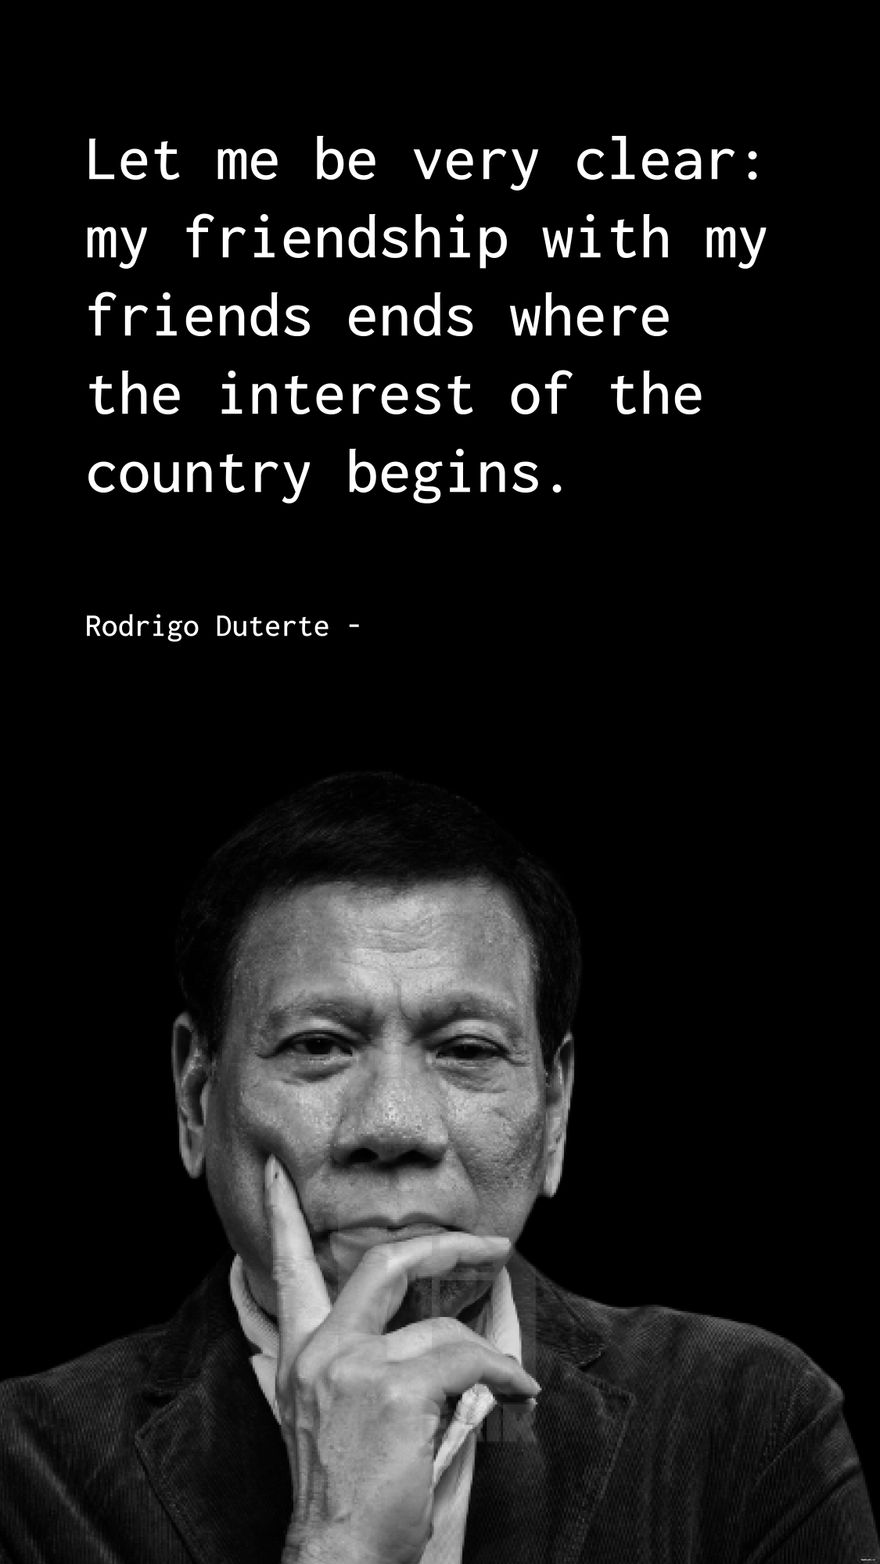 Rodrigo Duterte - Let me be very clear: my friendship with my friends ends where the interest of the country begins.